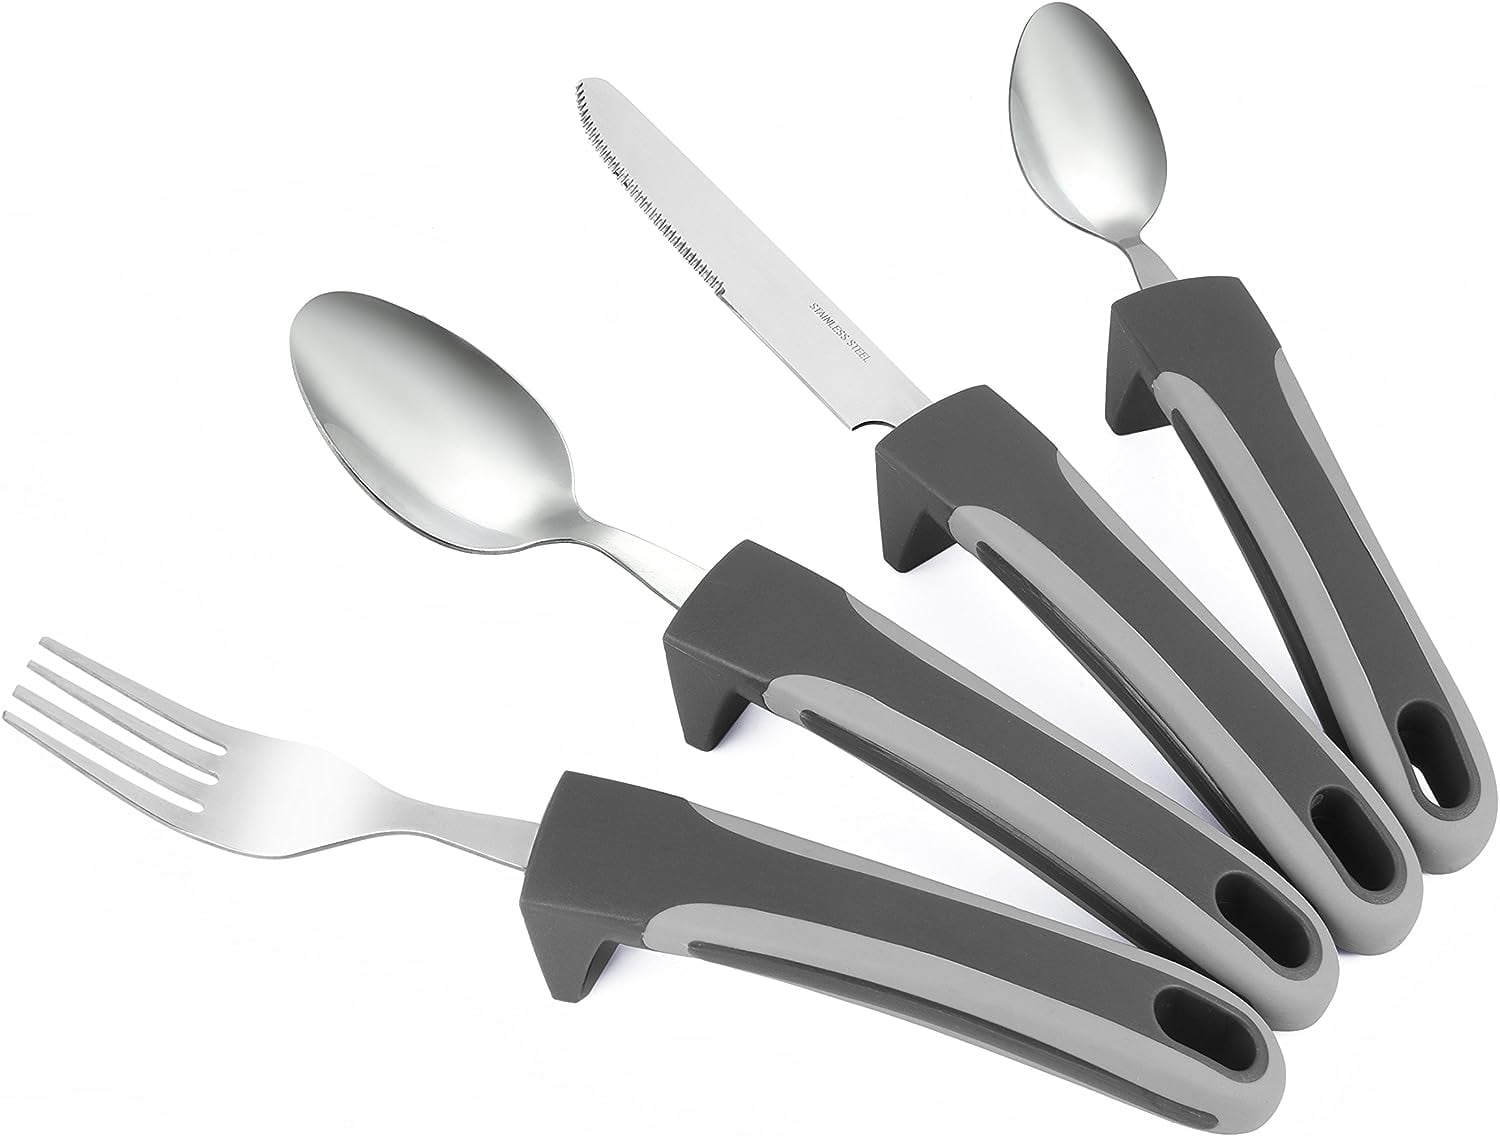 Special Supplies Adaptive Utensils 5-Piece Set Non-Weighted, Non-Slip  Handles for Hand Tremors, Arthritis, Parkinson's or Elderly Use - Stainless  Steel Knife, Rocker Knife, Fork, Spoons - Red 